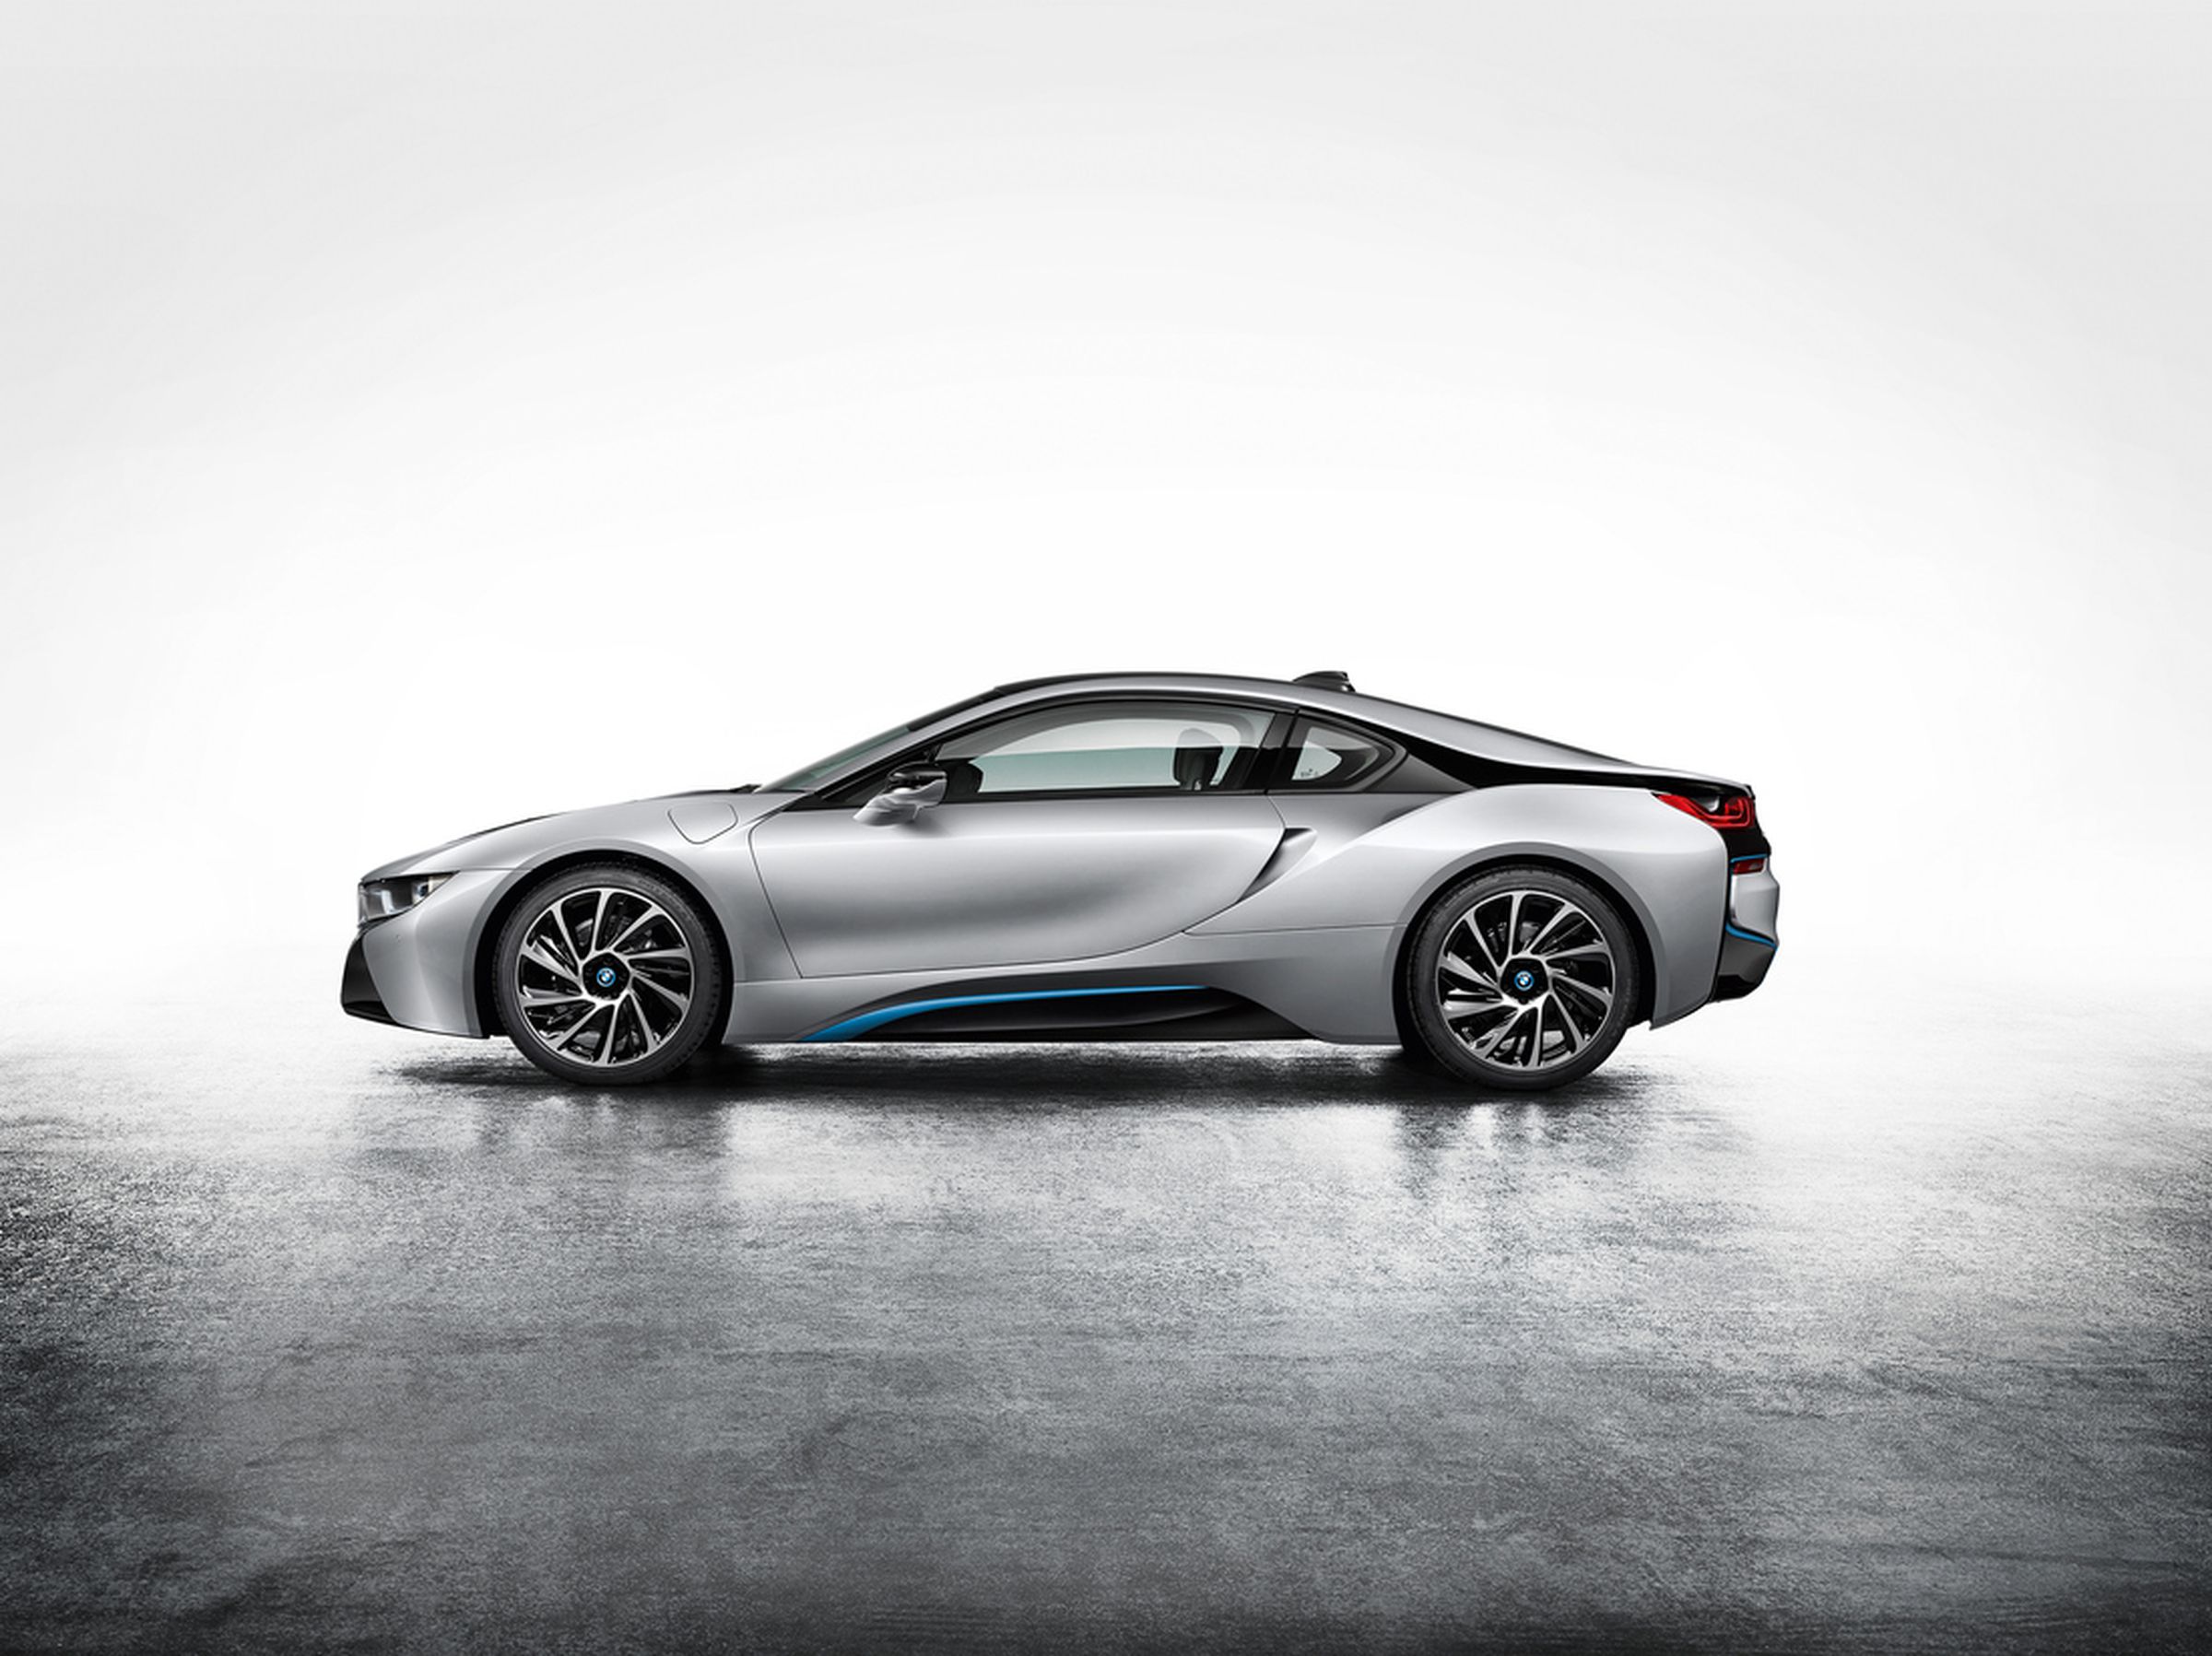 BMW i8: the production model